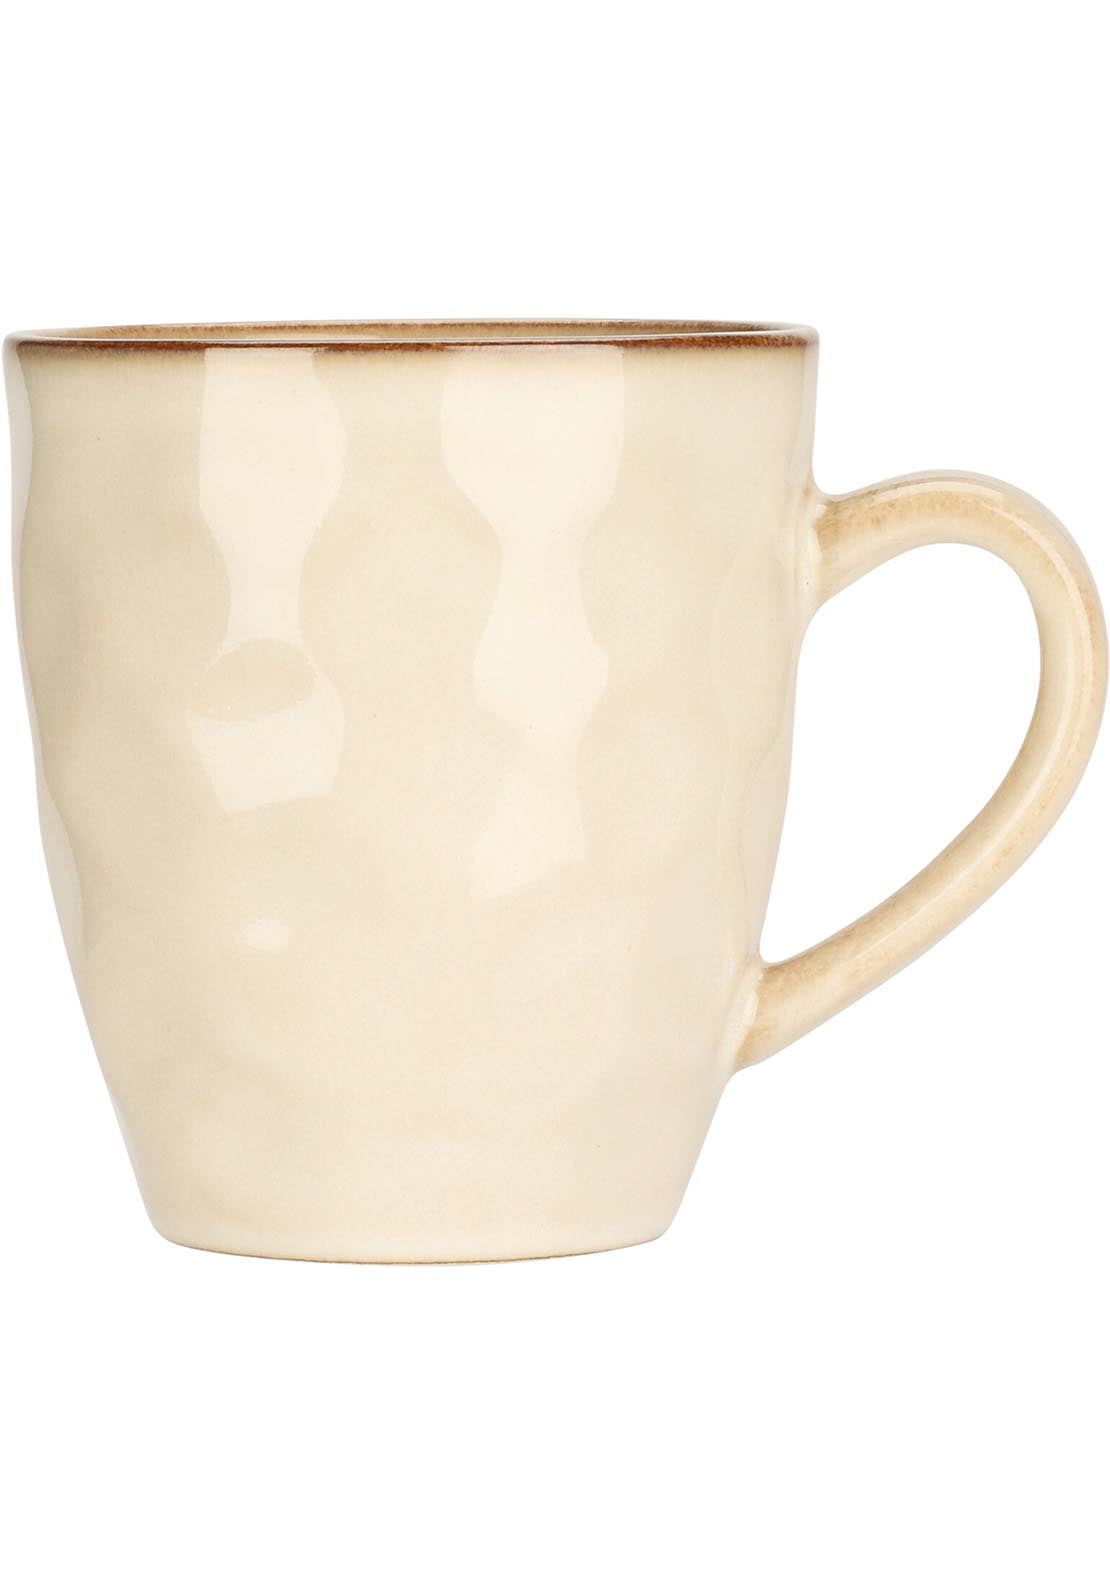 The Home Dining Embossed Stoneware Mug 1 Shaws Department Stores